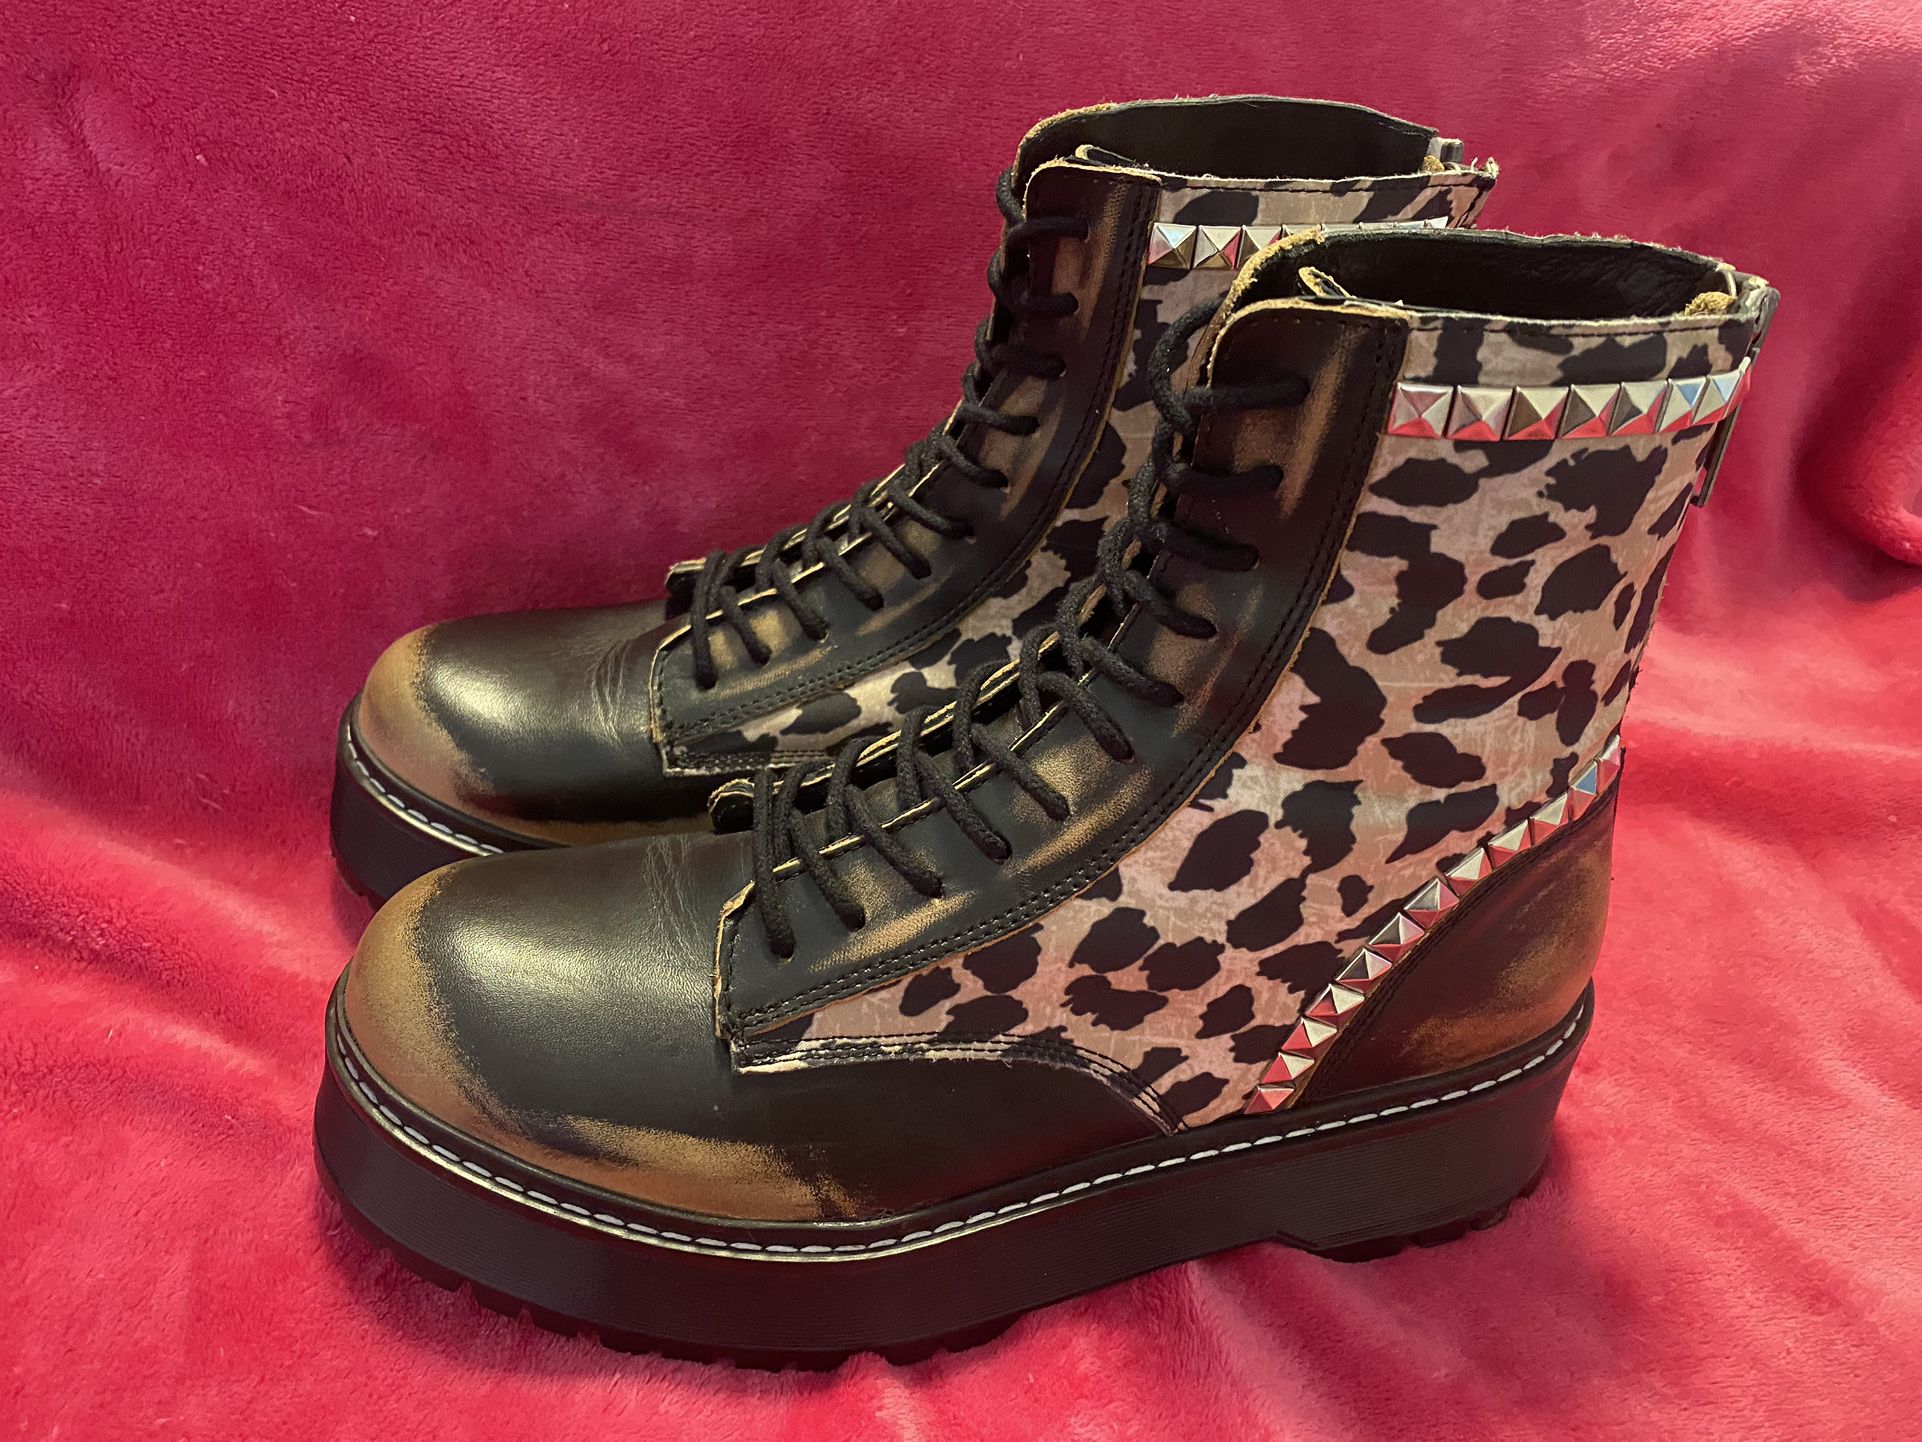 Steve Madden Avenger leather leopard print lace up boots with zip back. Size 10 Punk